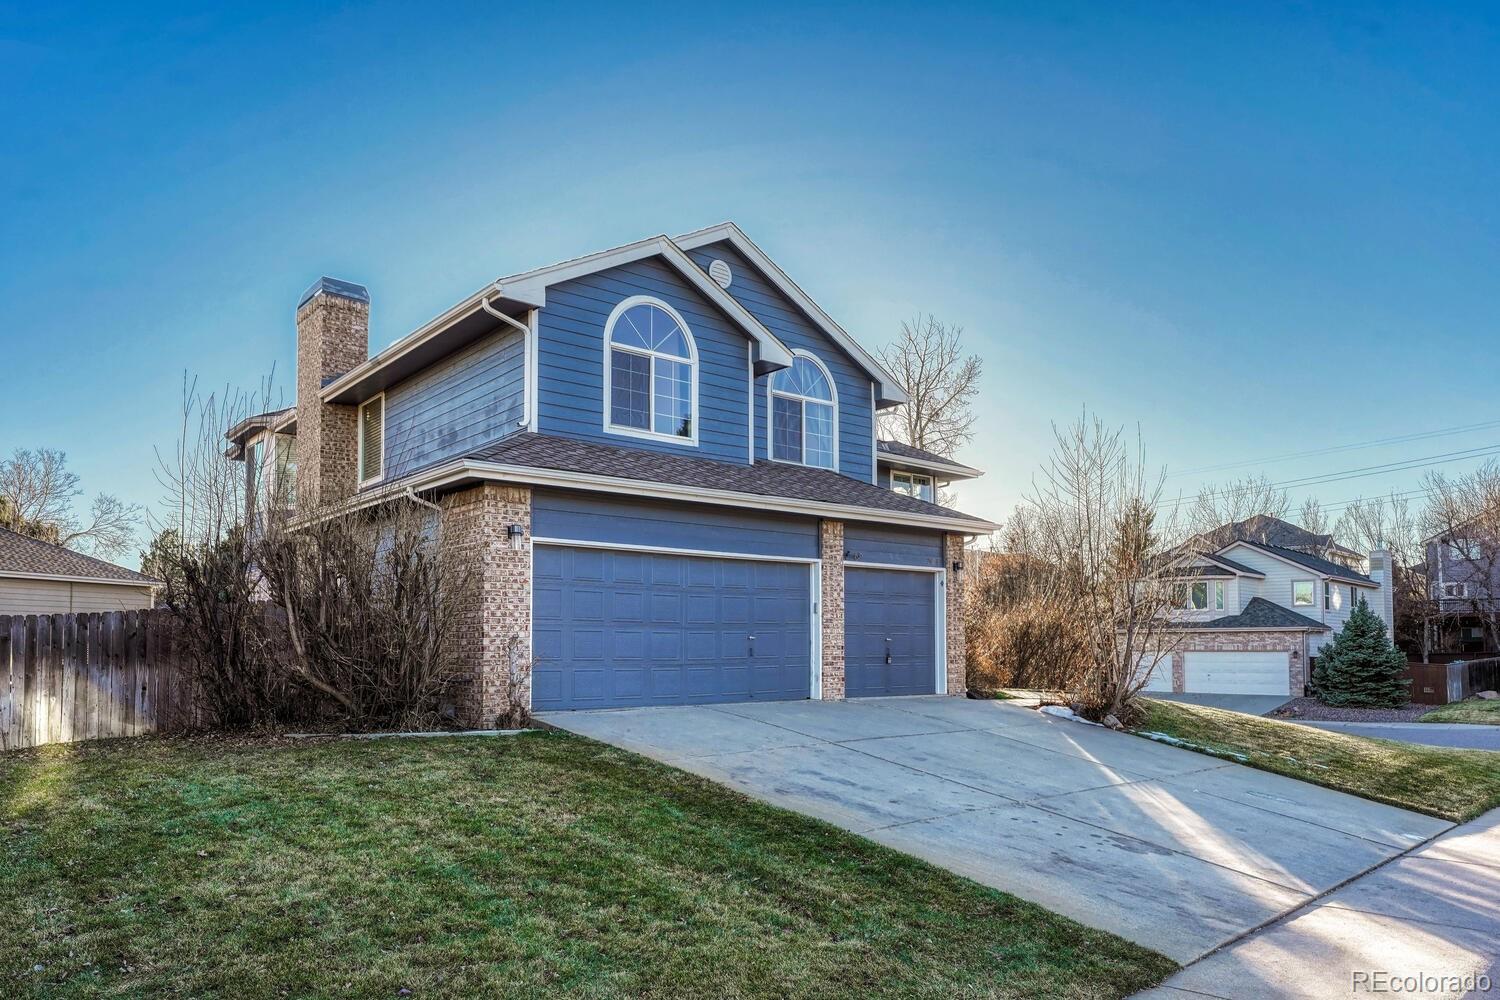 Report Image for 7408  Bluefox Court,Lone Tree, Colorado